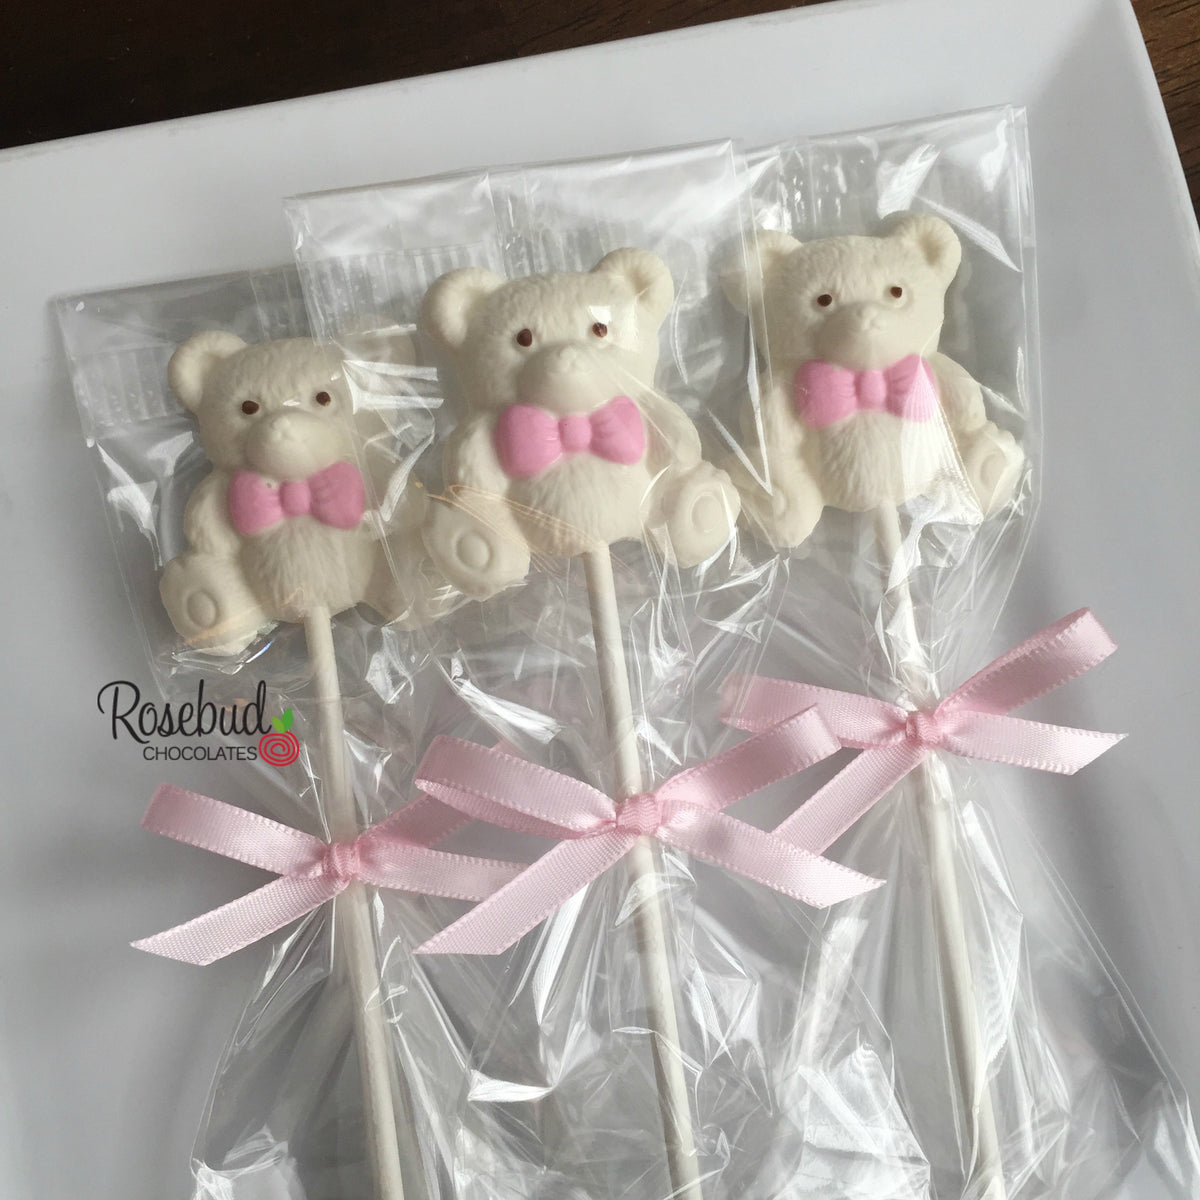 It's A Girl white chocolate lollipops Pink Baby Shower Candy Favors  www.rosebudchocolates.…